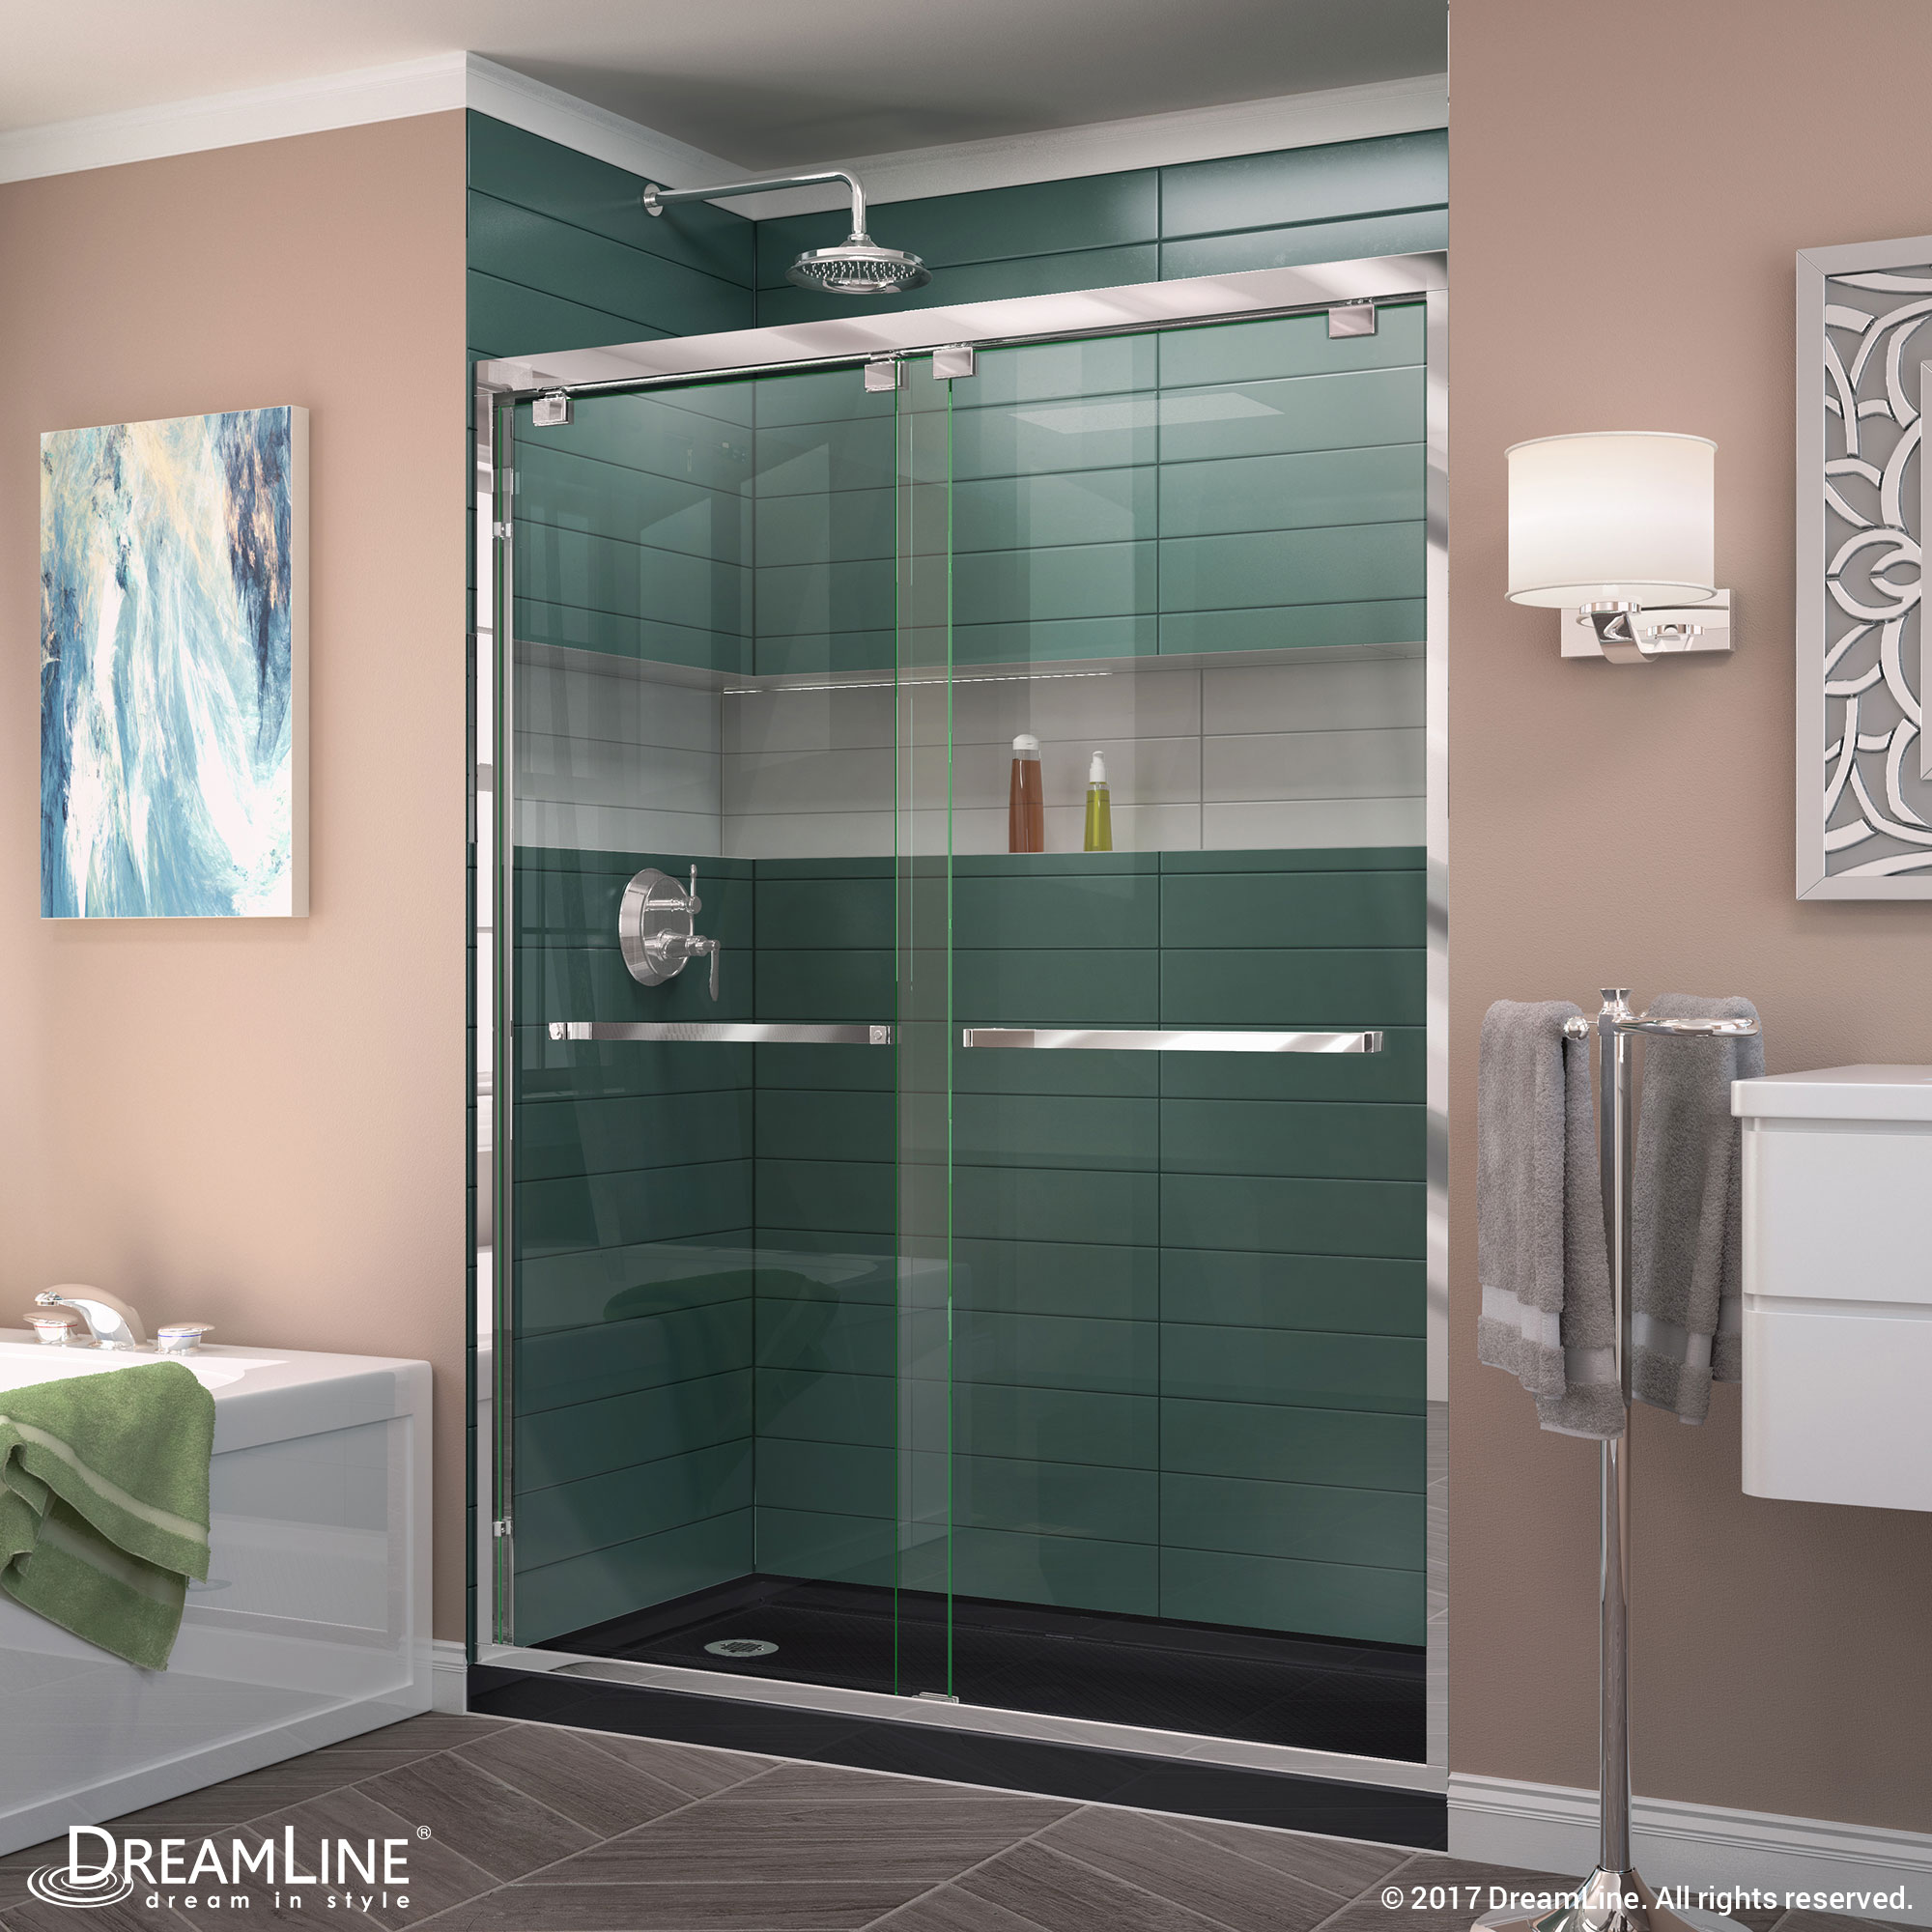 DreamLine Encore 32 in. D x 60 in. W x 78 3/4 in. H Bypass Shower Door in Oil Rubbed Bronze and Left Drain Biscuit Base Kit